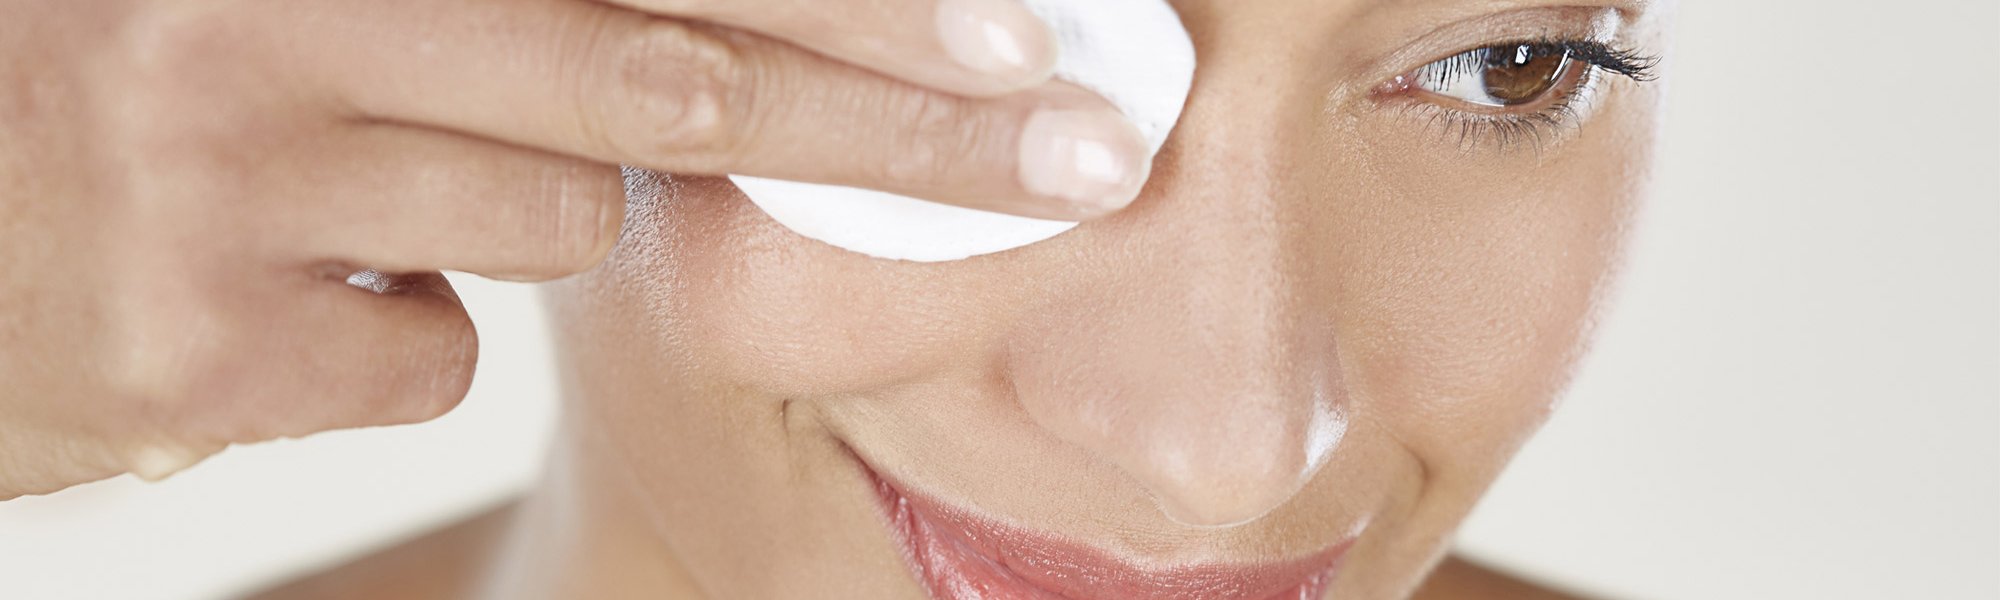 Take Off Your Makeup The Right Way With Makeup Remover